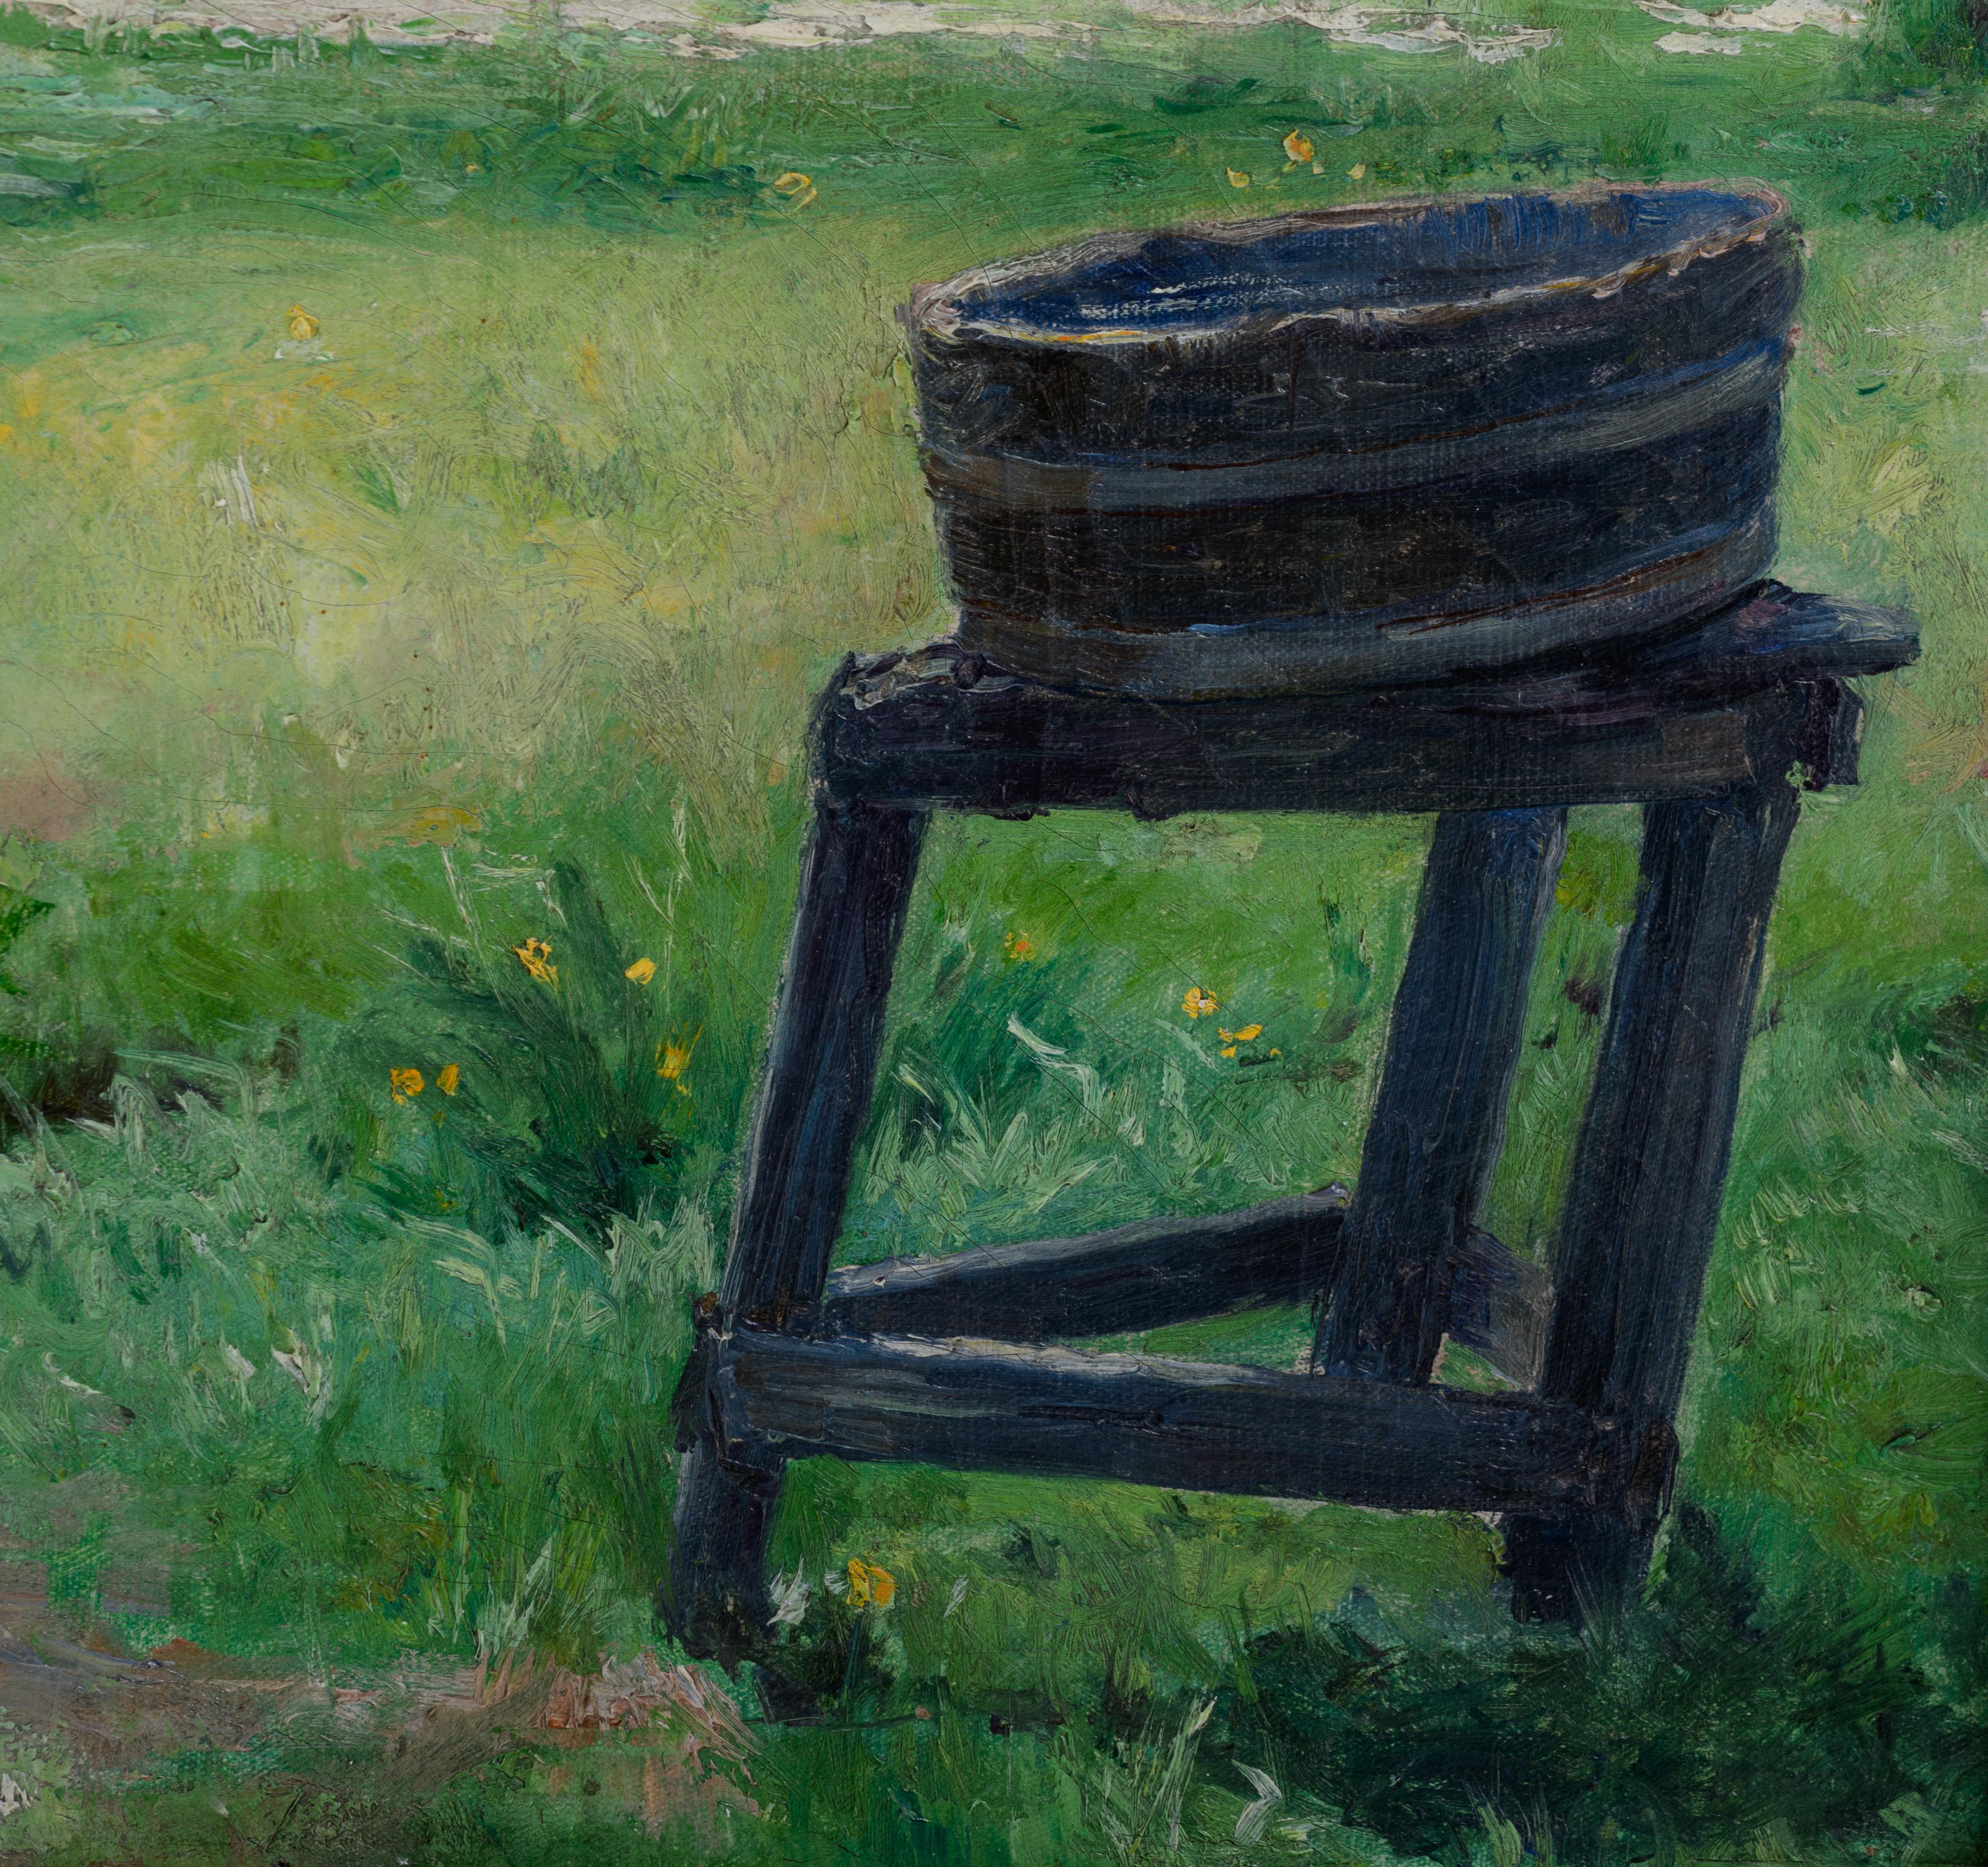 Horenbant J., the laundry tub, oil on canvas, 34 x 45 cm. Added: Montobio G., the haystacks in summe - Image 11 of 12